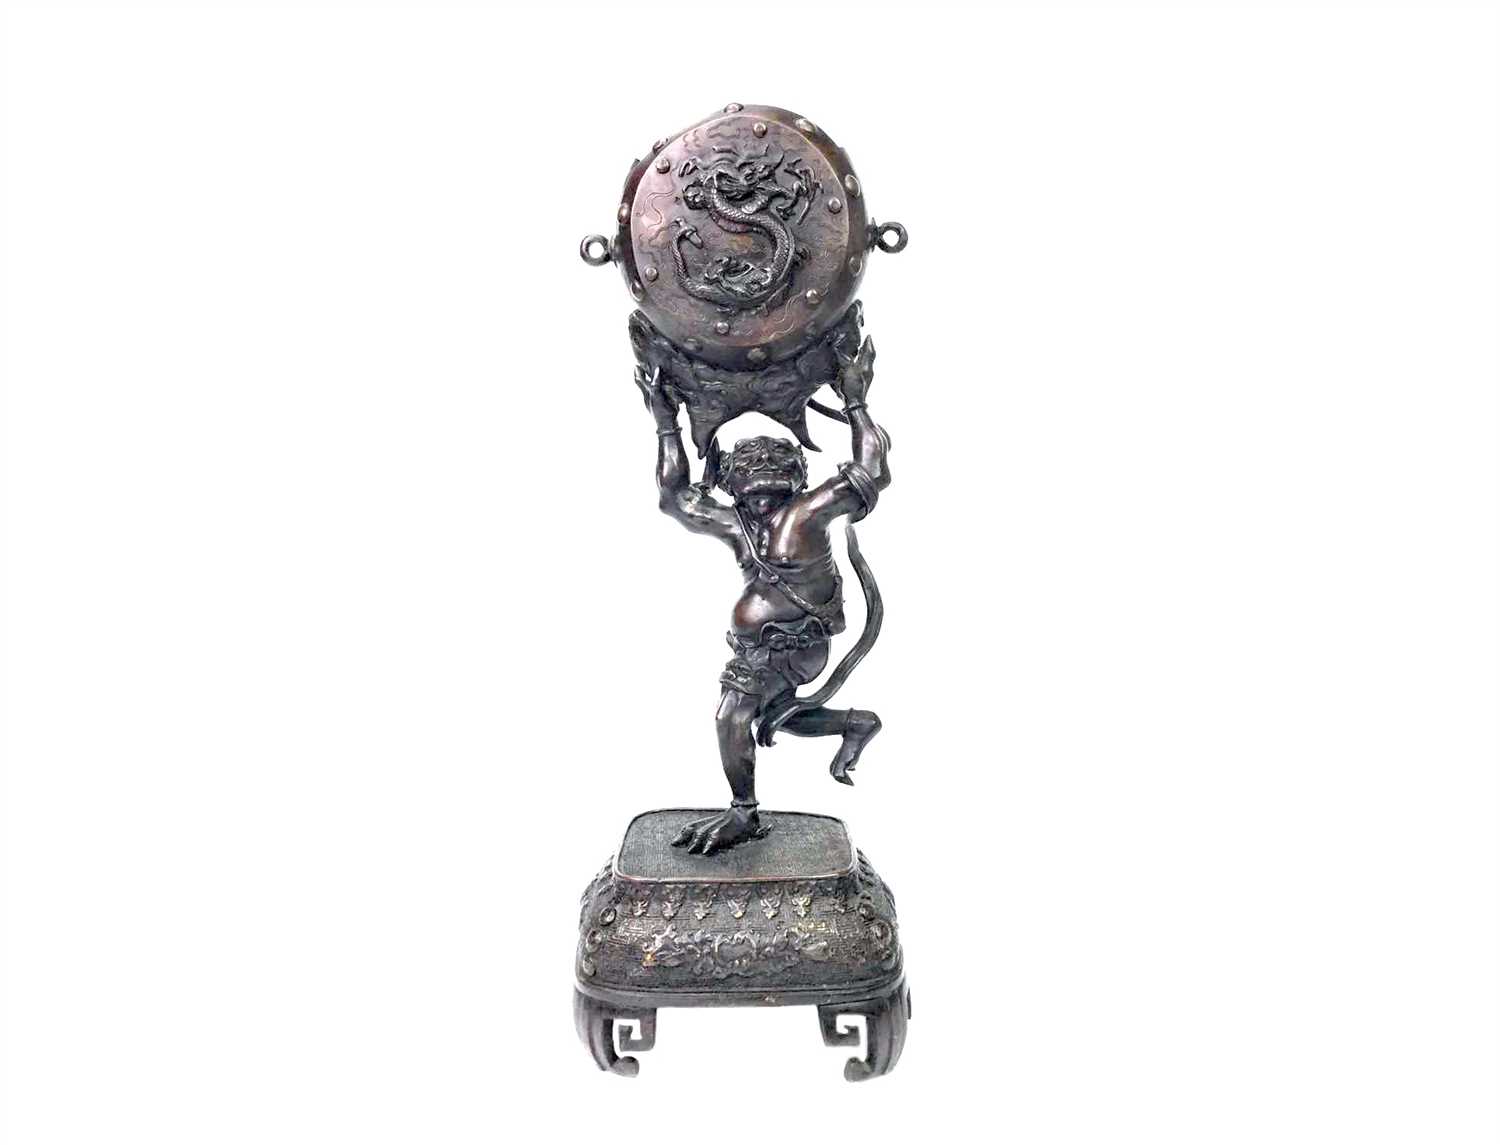 Lot 1116 - A LATE 19TH/EARLY 20TH CENTURY JAPANESE BRONZE MYTHICAL FIGURE